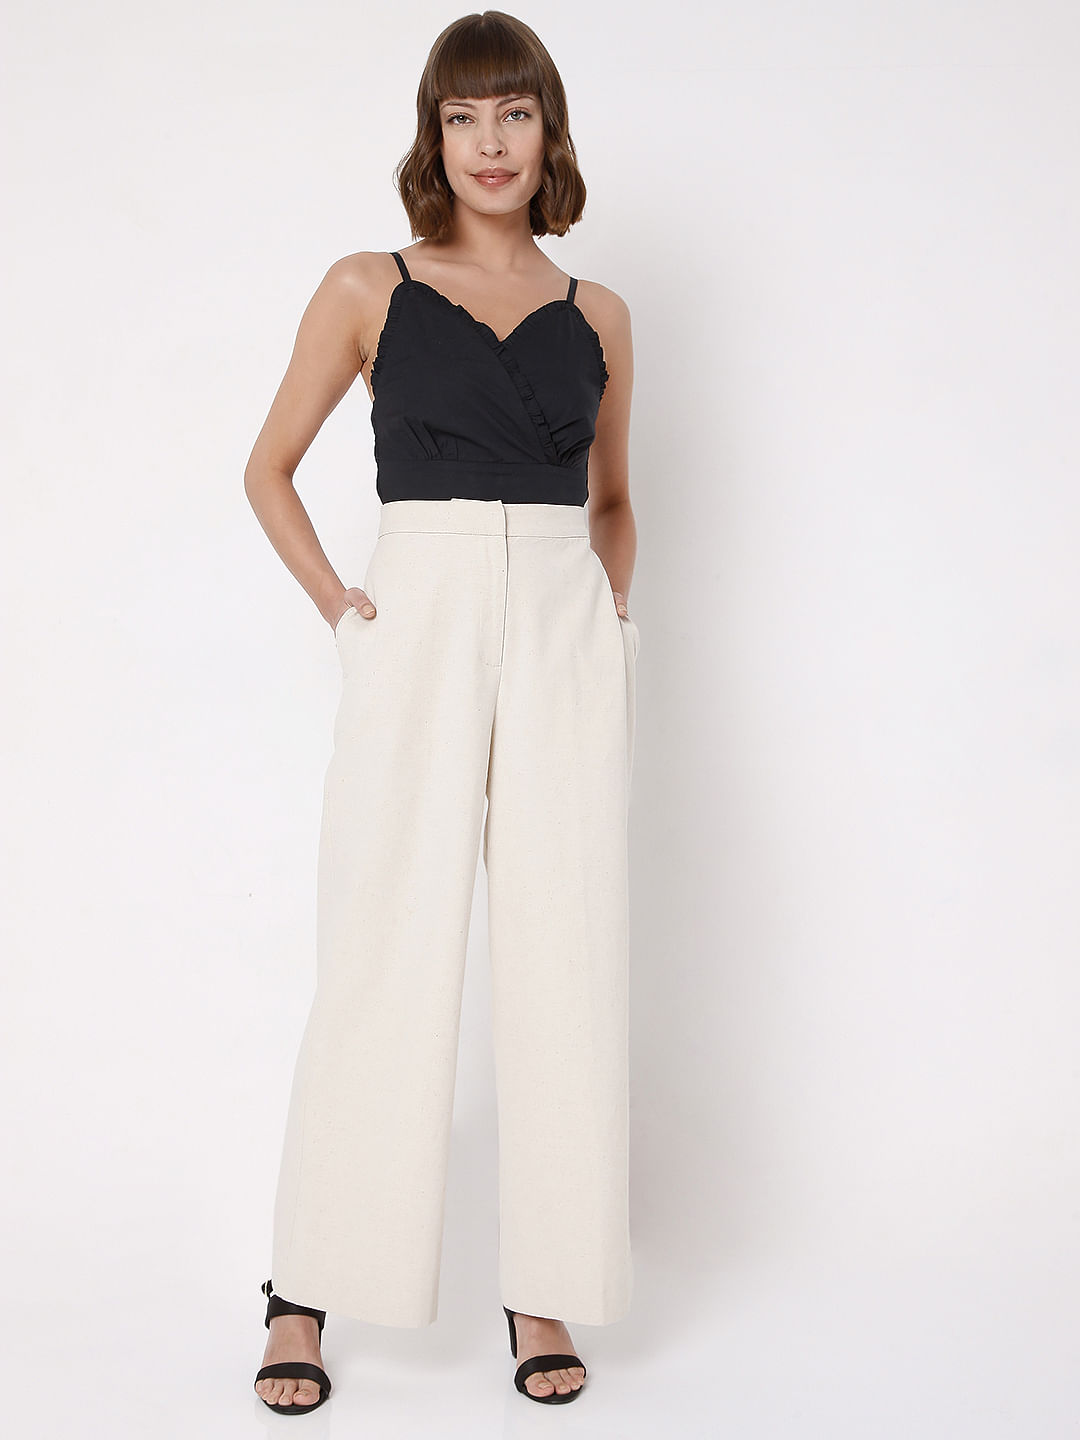 Buy White Trousers  Pants for Women by Magre Online  Ajiocom